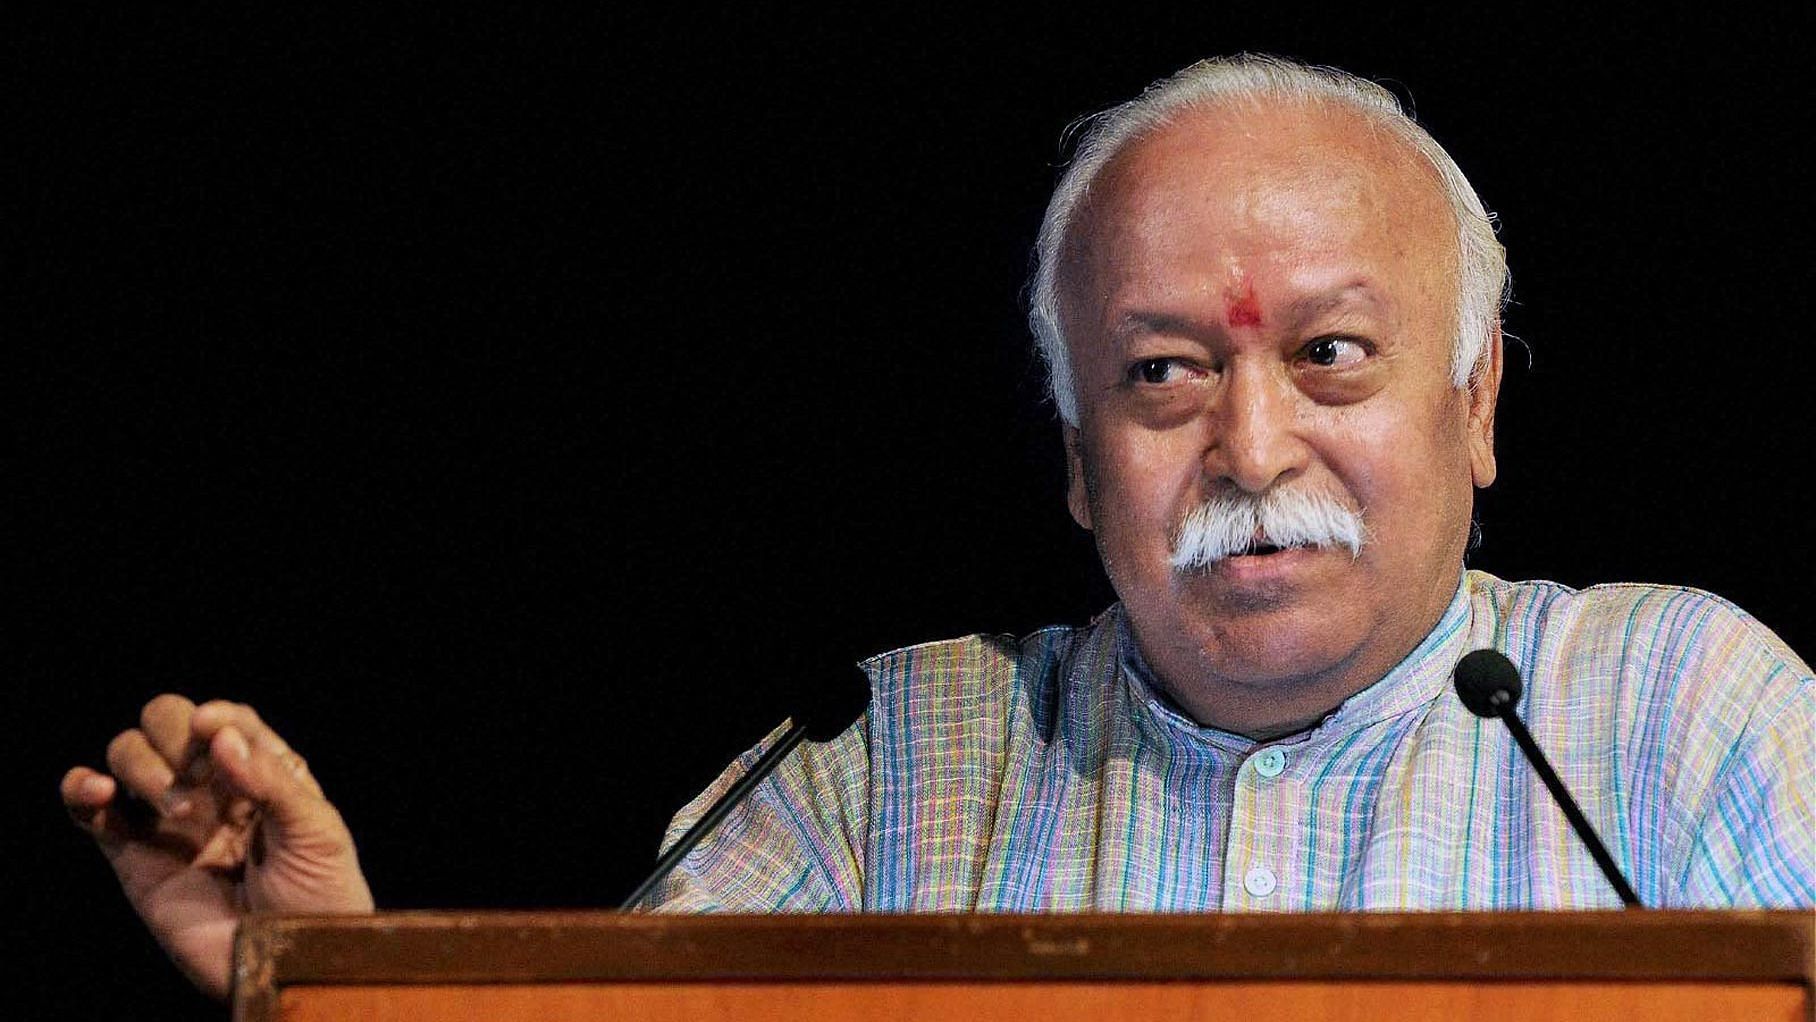 Mohan Bhagwat said that RSS will suspend its Ram temple stir for four months, till the Lok Sabha elections are over.